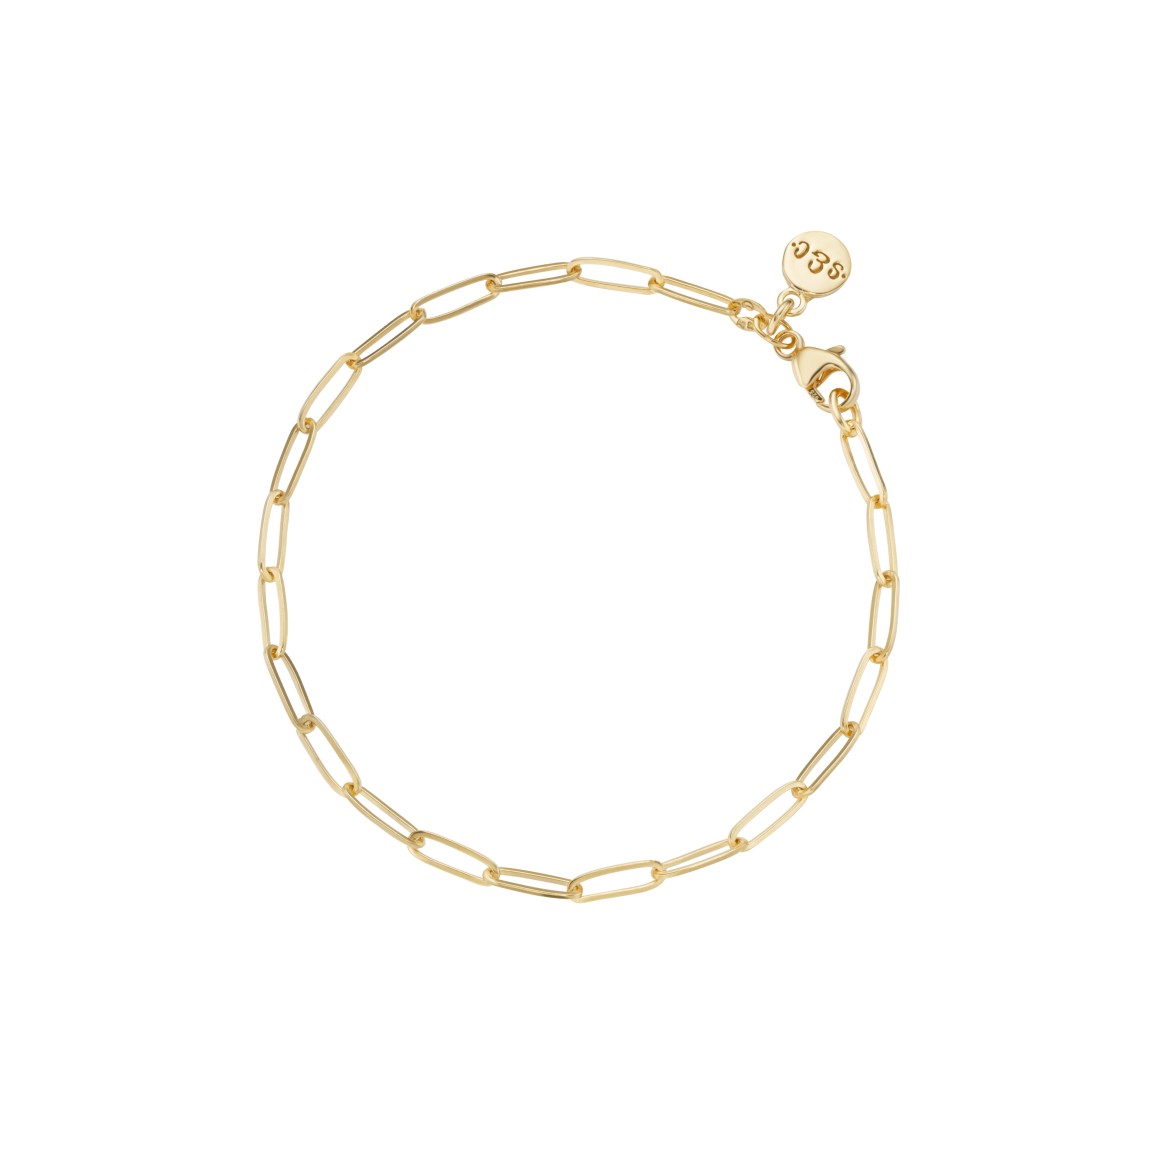 Small link bracelet Sterling silver gold-plated